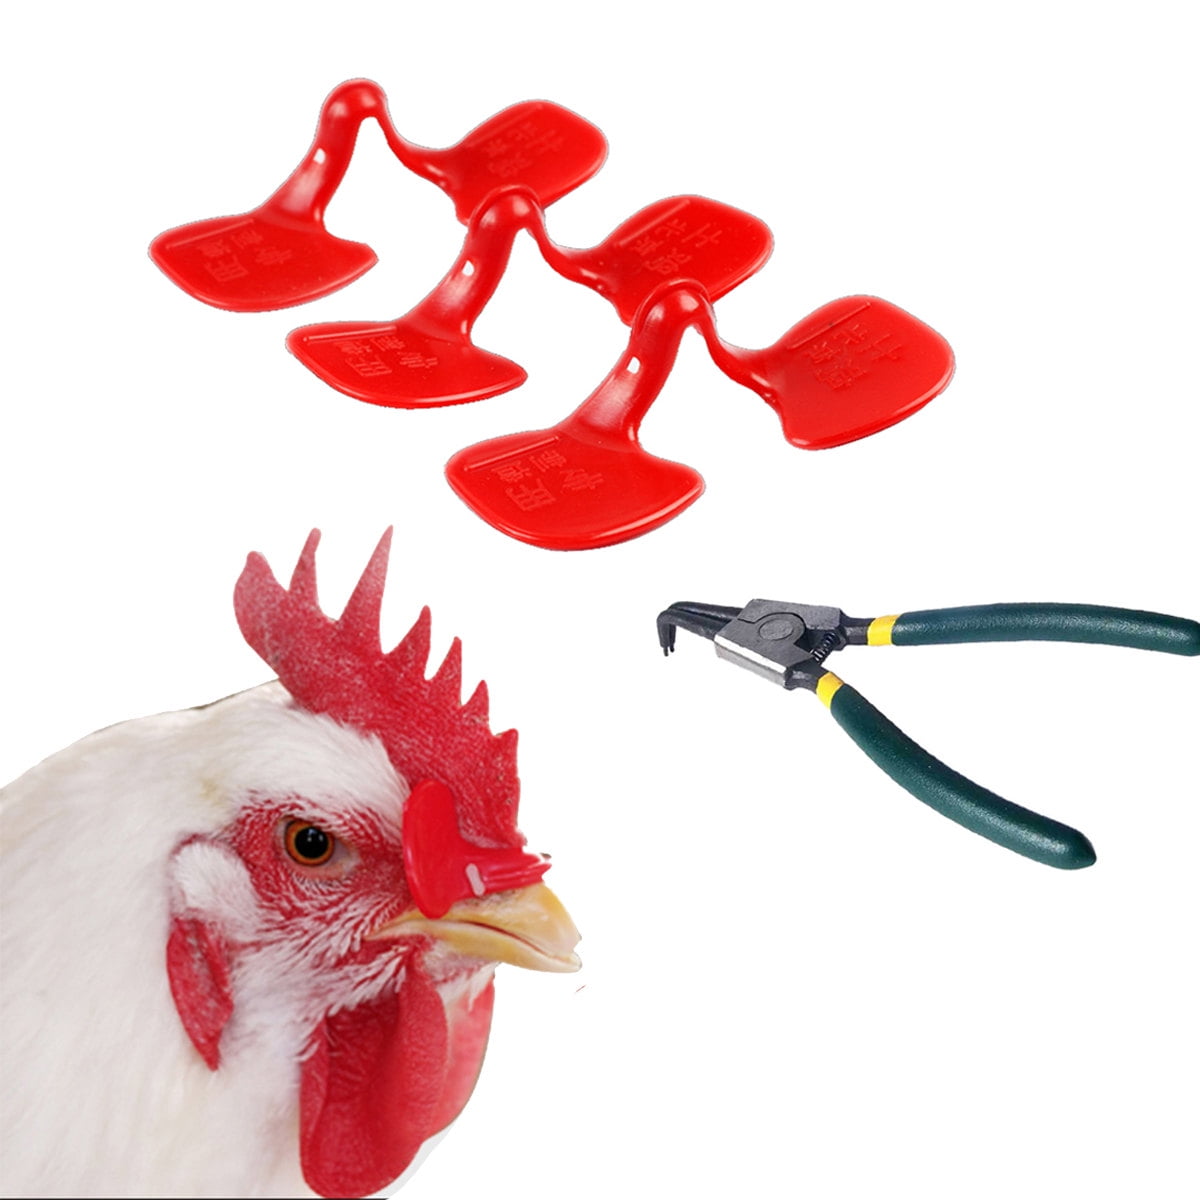 10-100PCS Pinless Chicken Peepers Pheasant Poultry Blinders Spectacles 